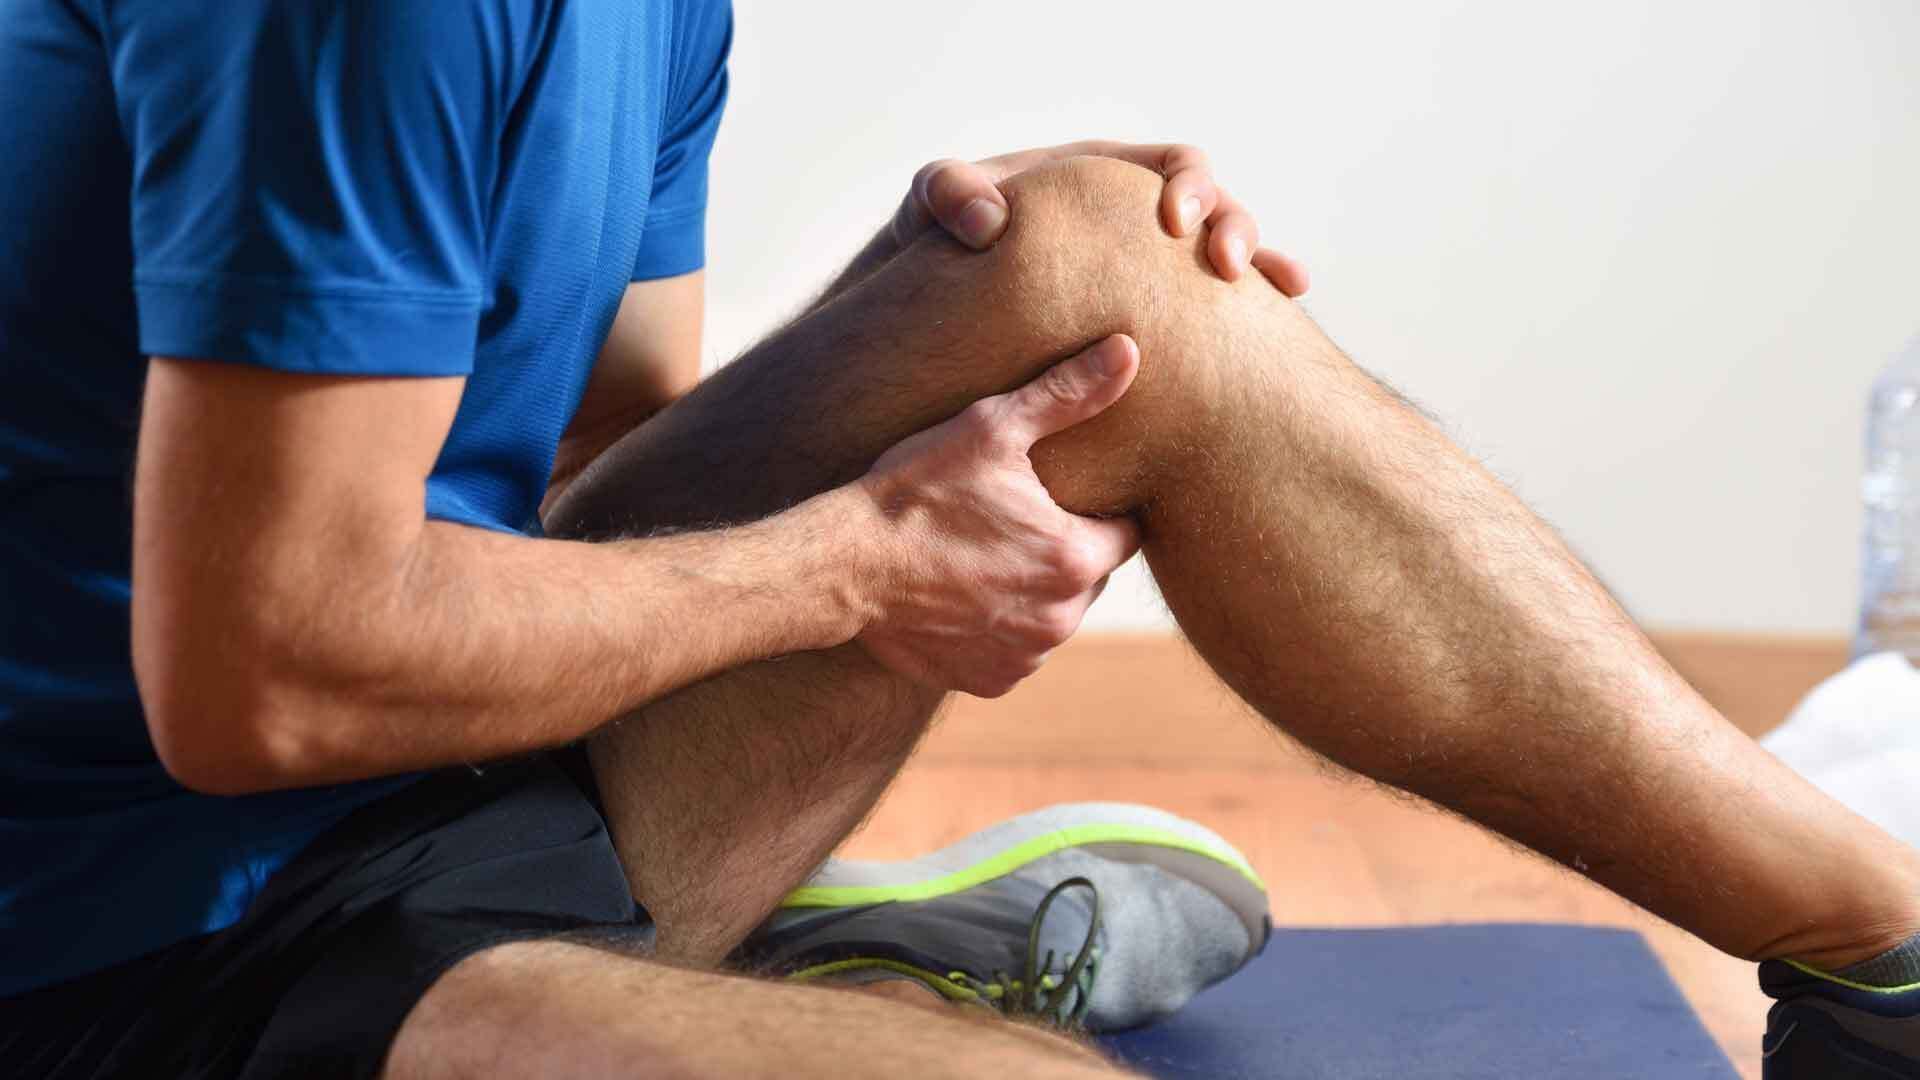 Pain in the back of the knee: What could be behind it?